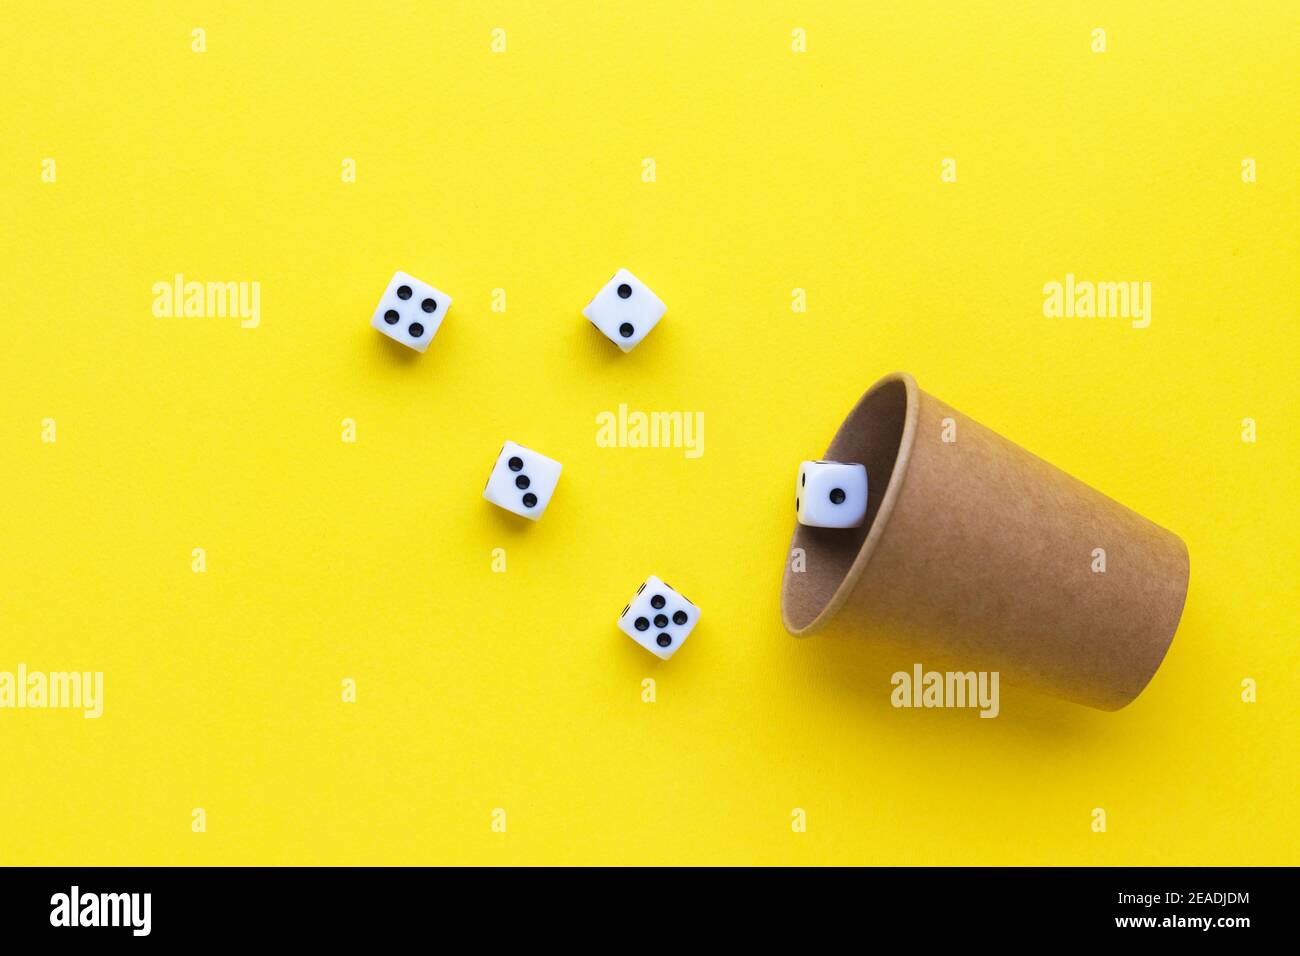 Gaming dice and cardboard cup on yellow background. Playing cube with numbers. Items for board games. Flat lay, top view with copy space. Stock Photo